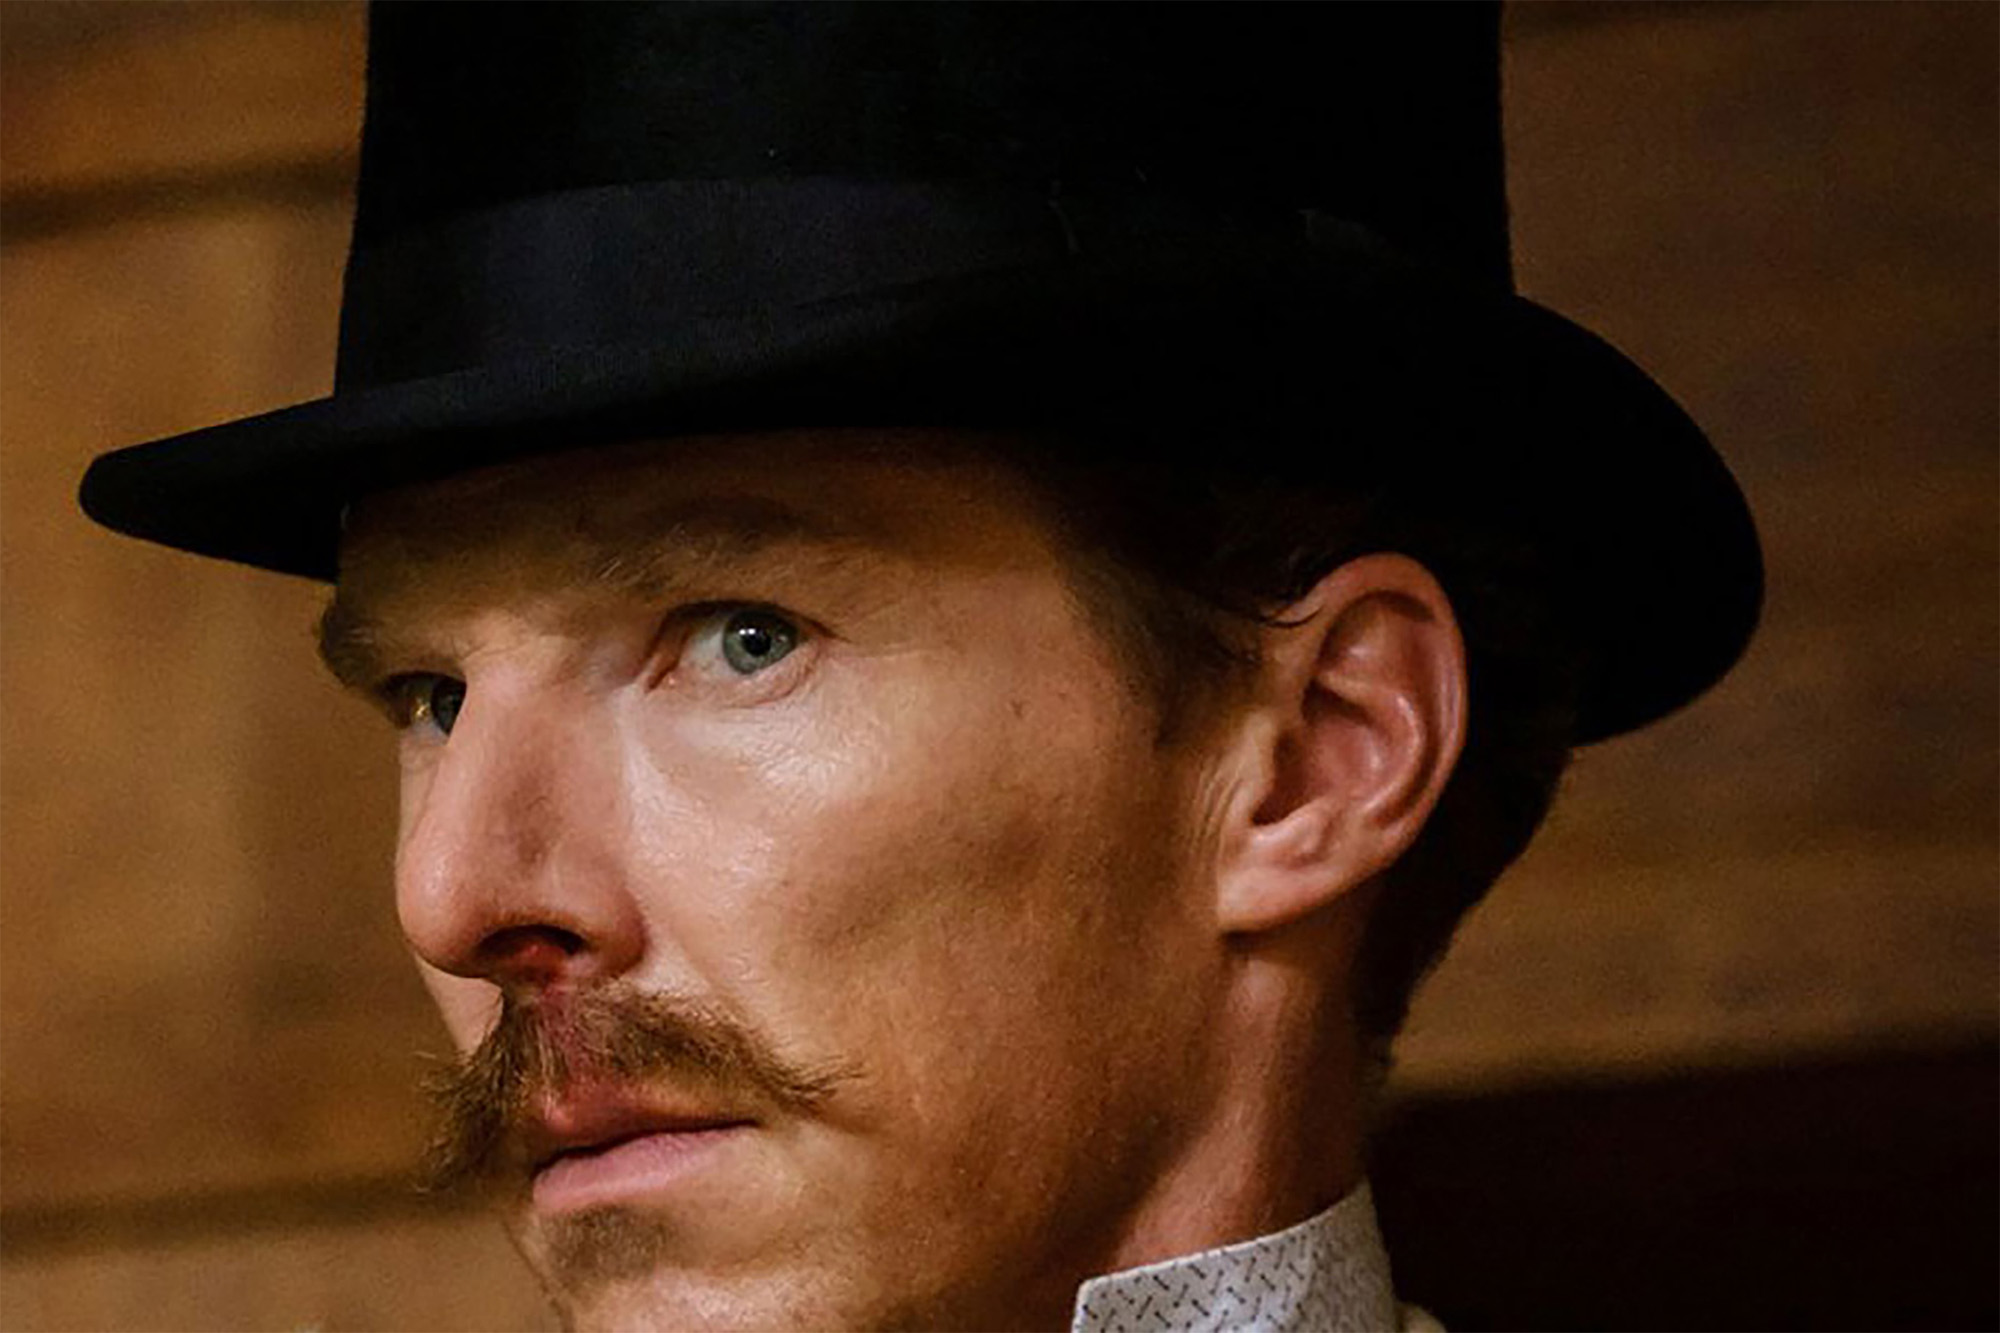 Louis Wain The Electrical Life Starring Benedict Cumberbatch And Claire Foy Review Of Unique Biopic!